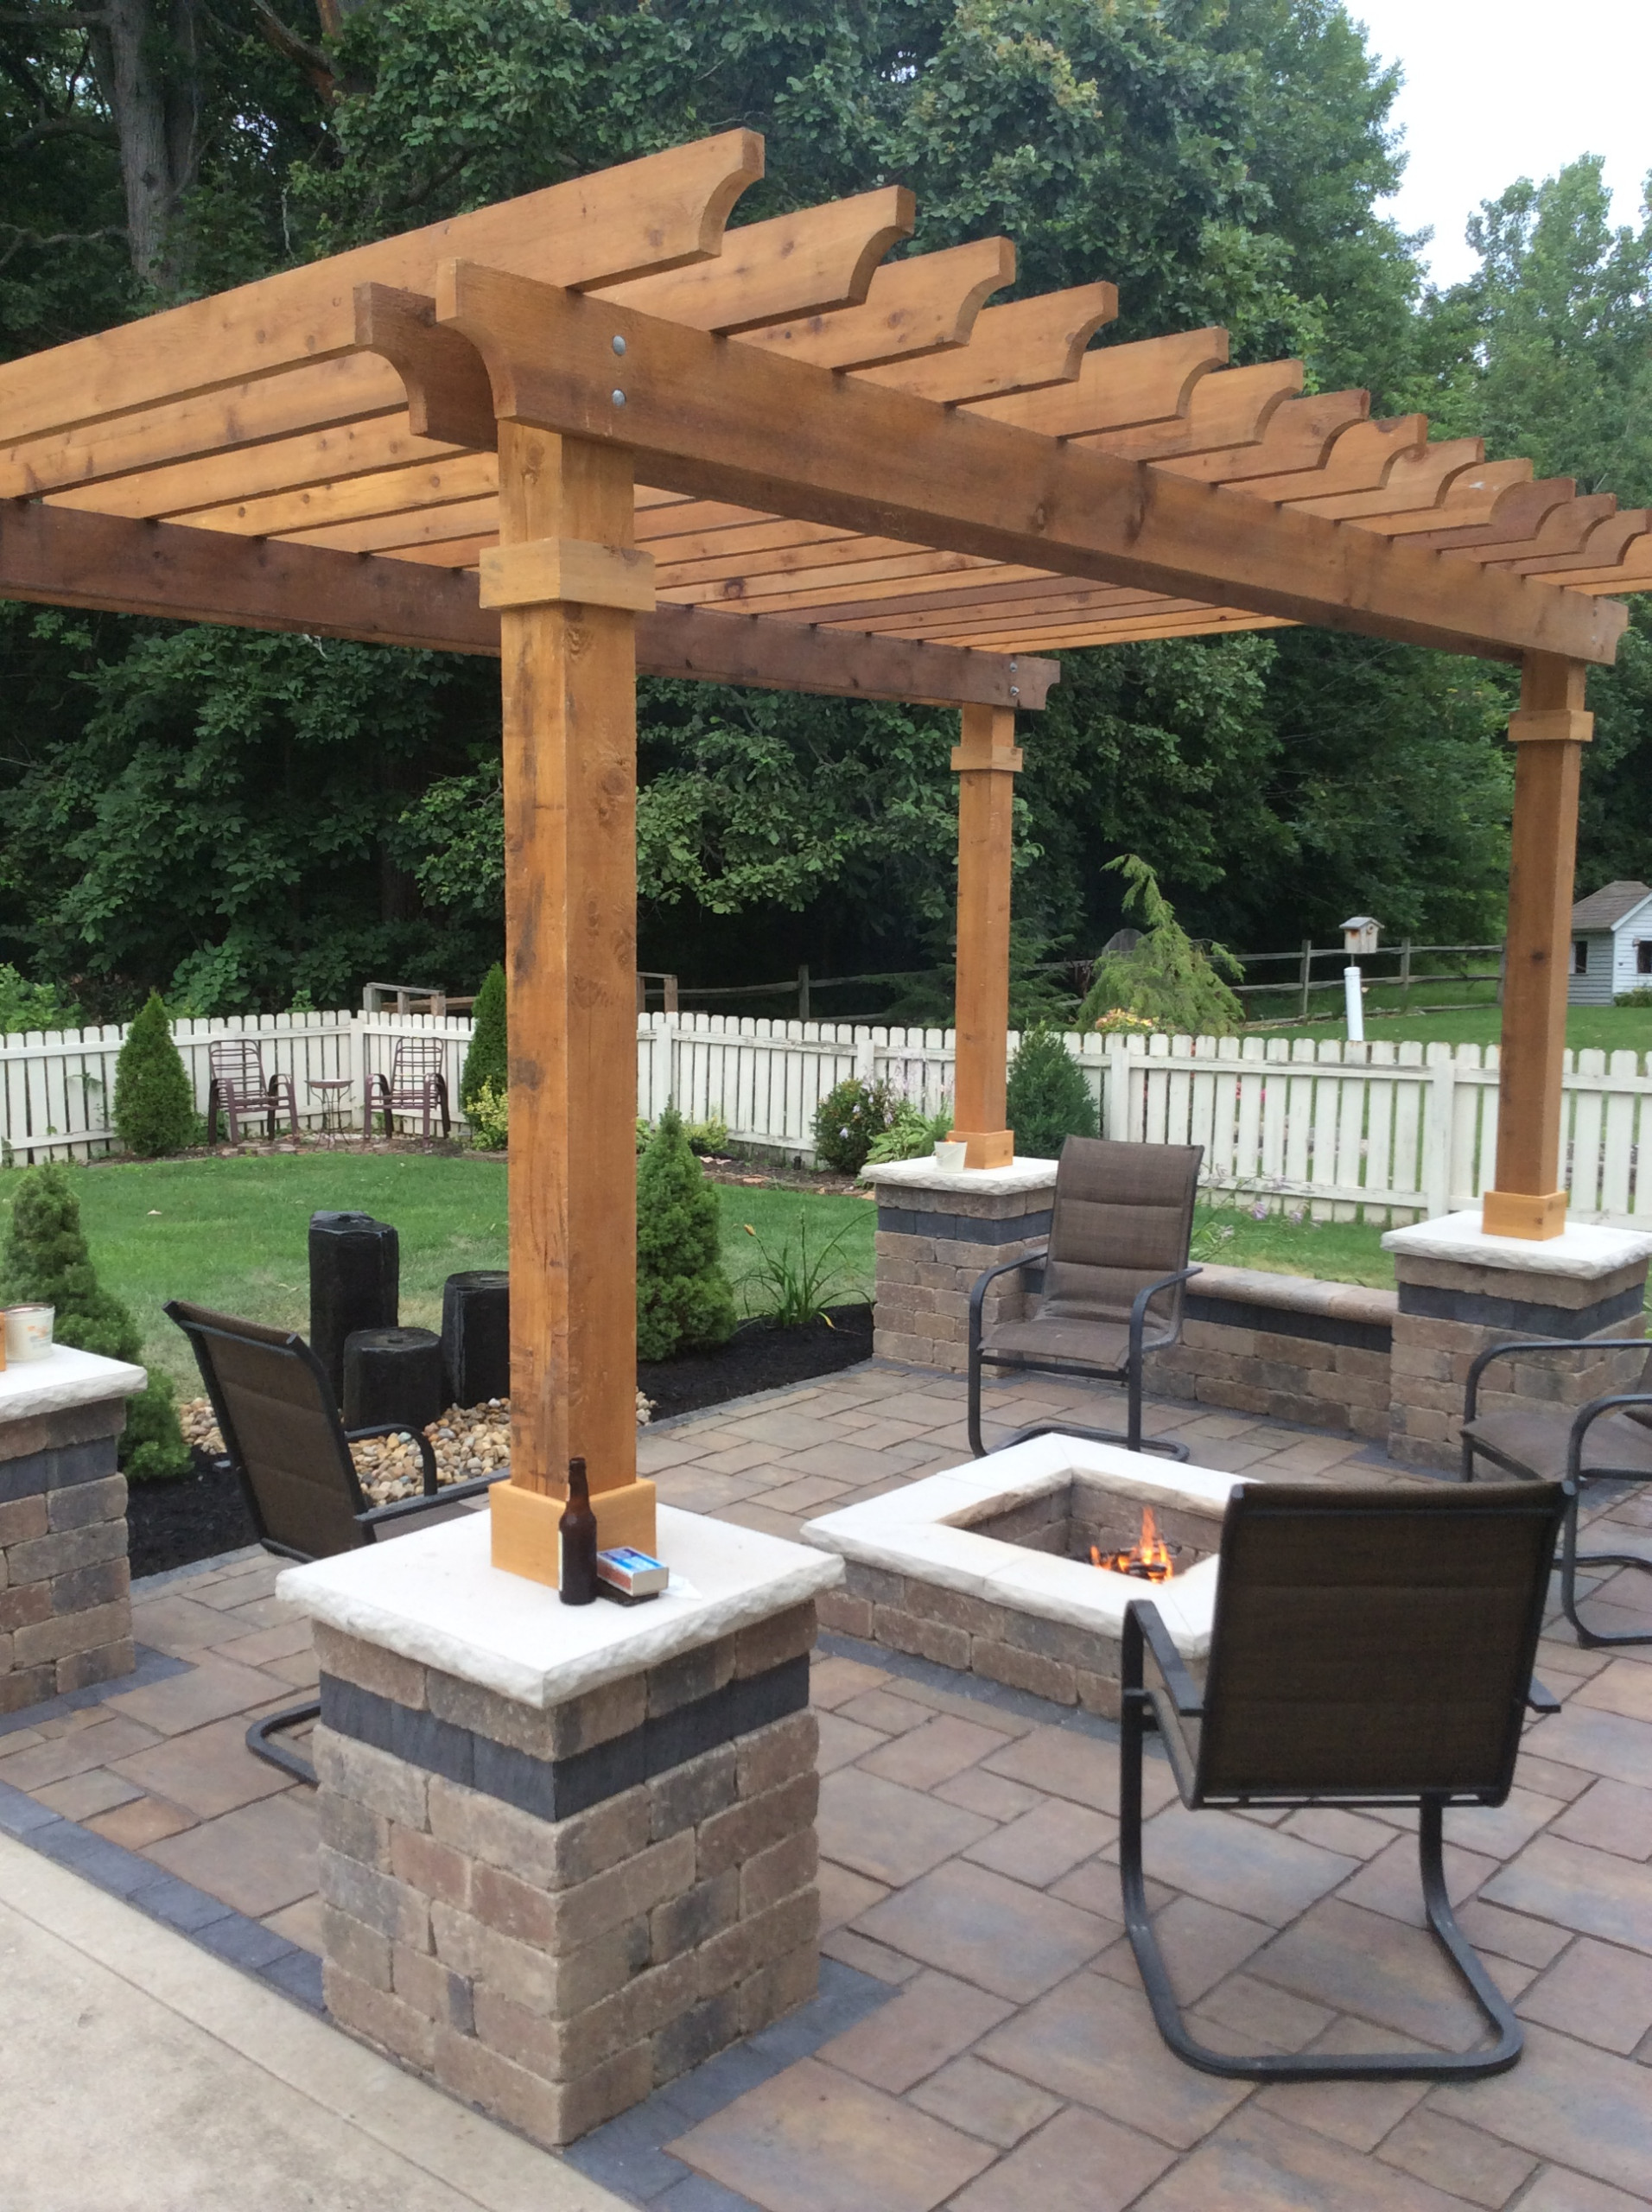 Westerville Patio Pergola Fire Pit Traditional Patio Columbus By Backyard Retreats Patios Ponds Houzz